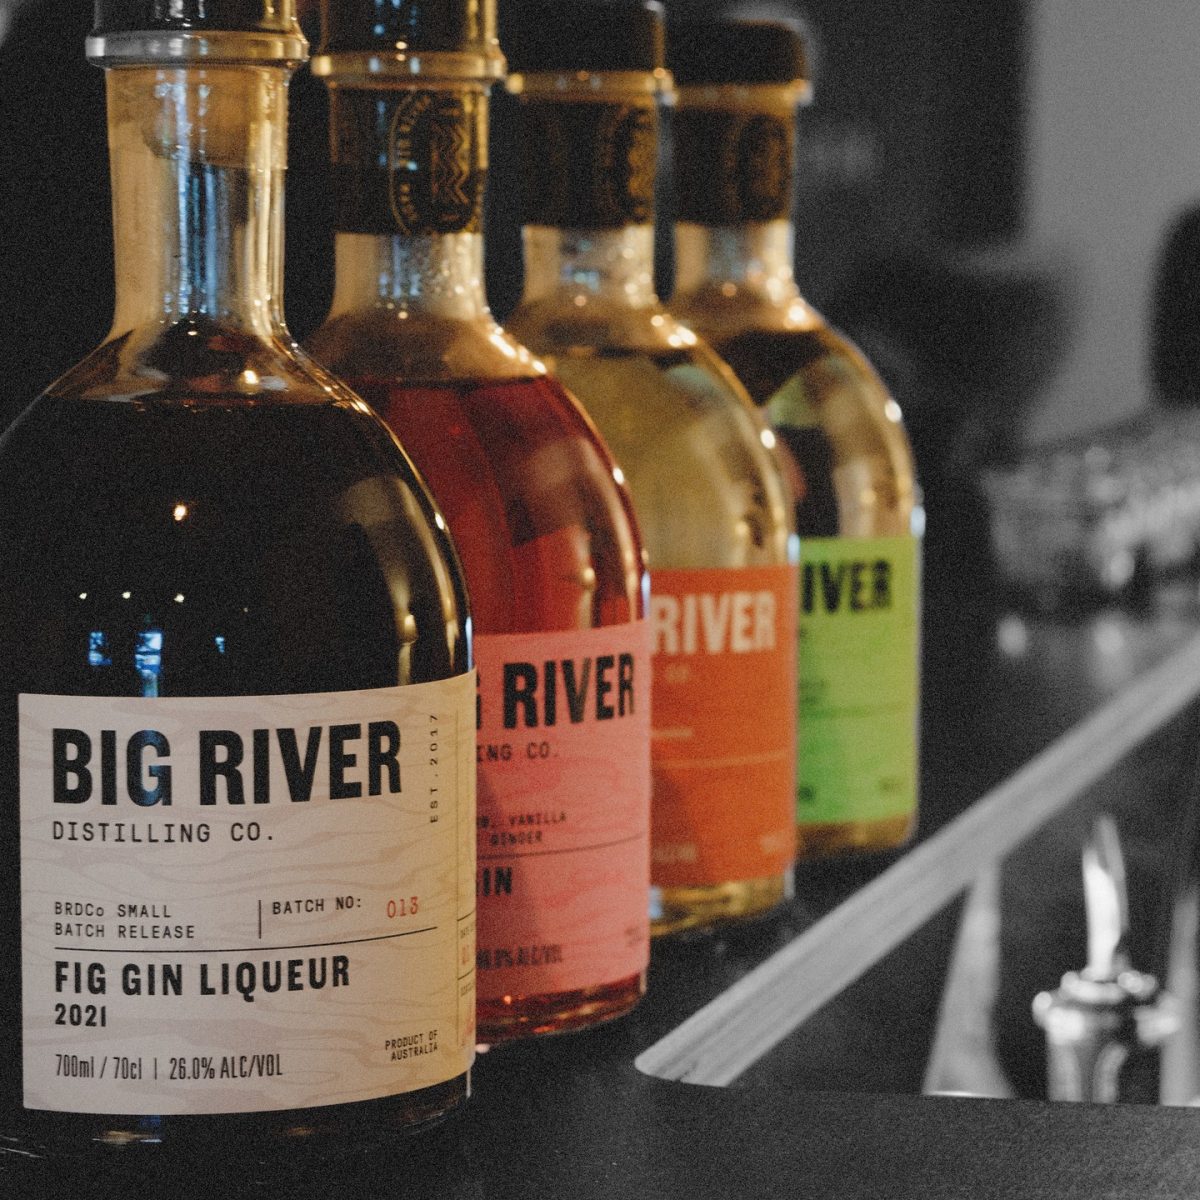 Four colourful bottles of spirits with Big River branding.